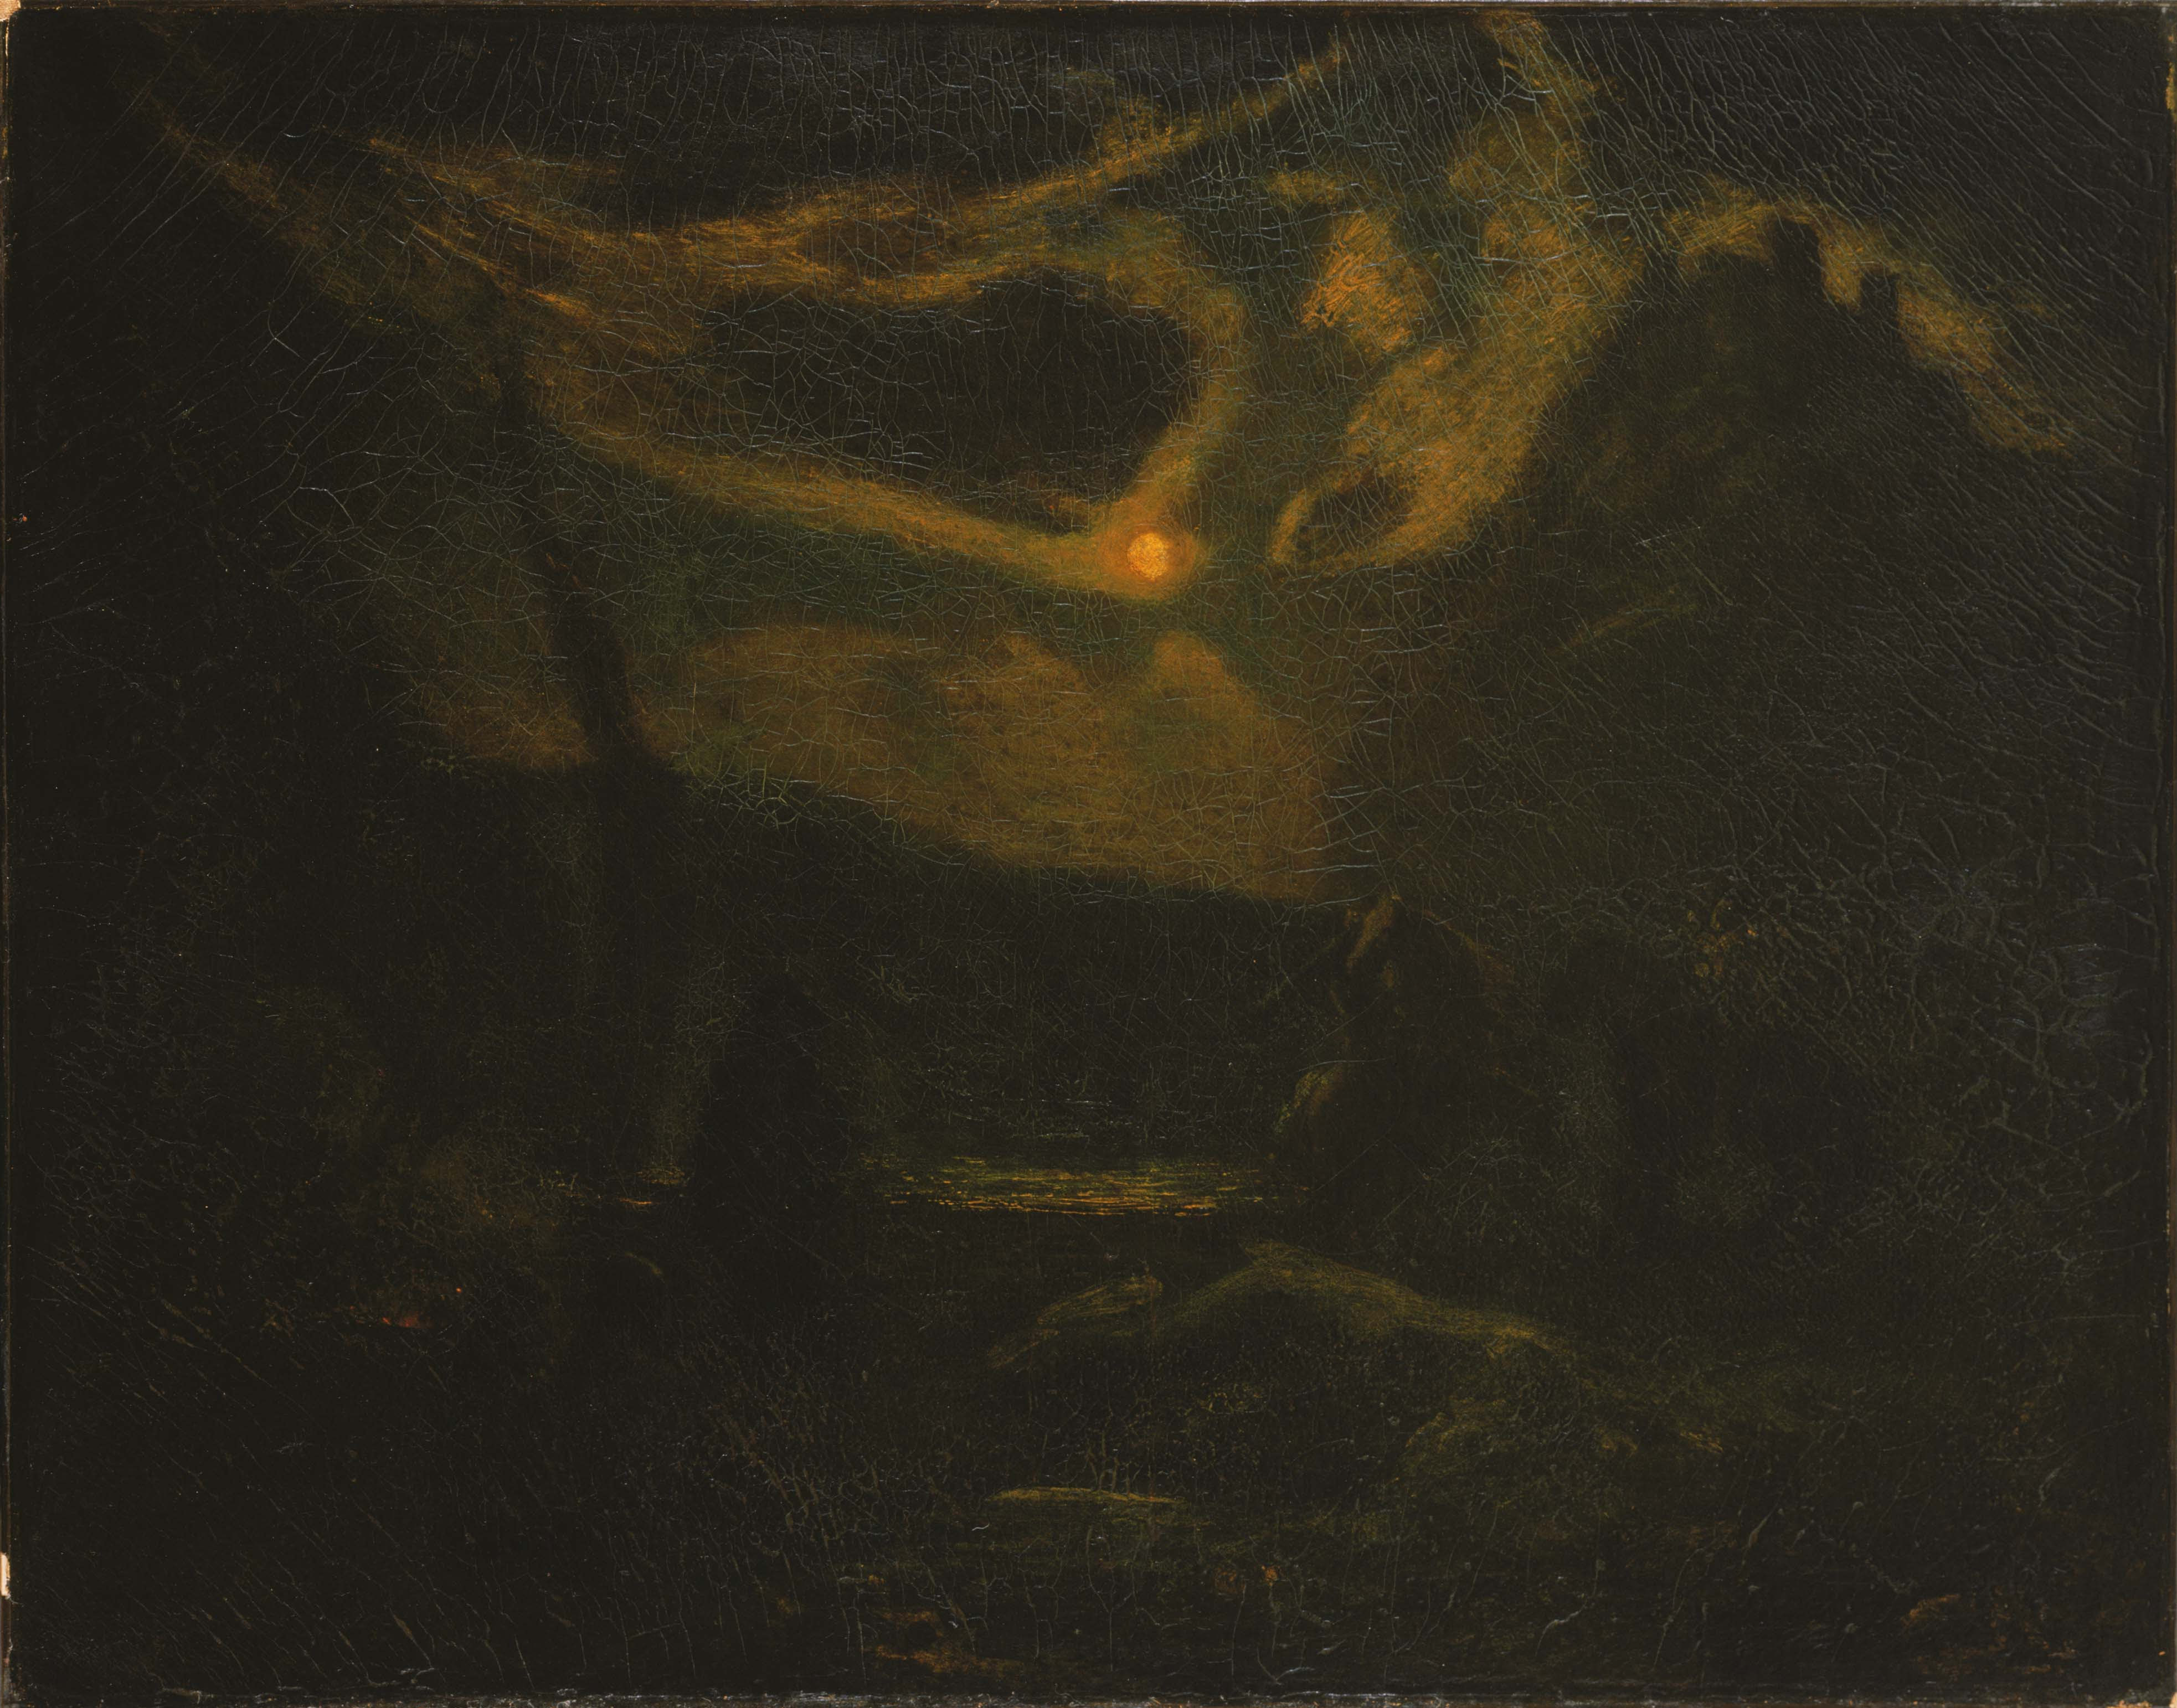 Albert_Pinkham_Ryder_-_Macbeth_and_the_Witches_-_Google_Art_Project.jpg